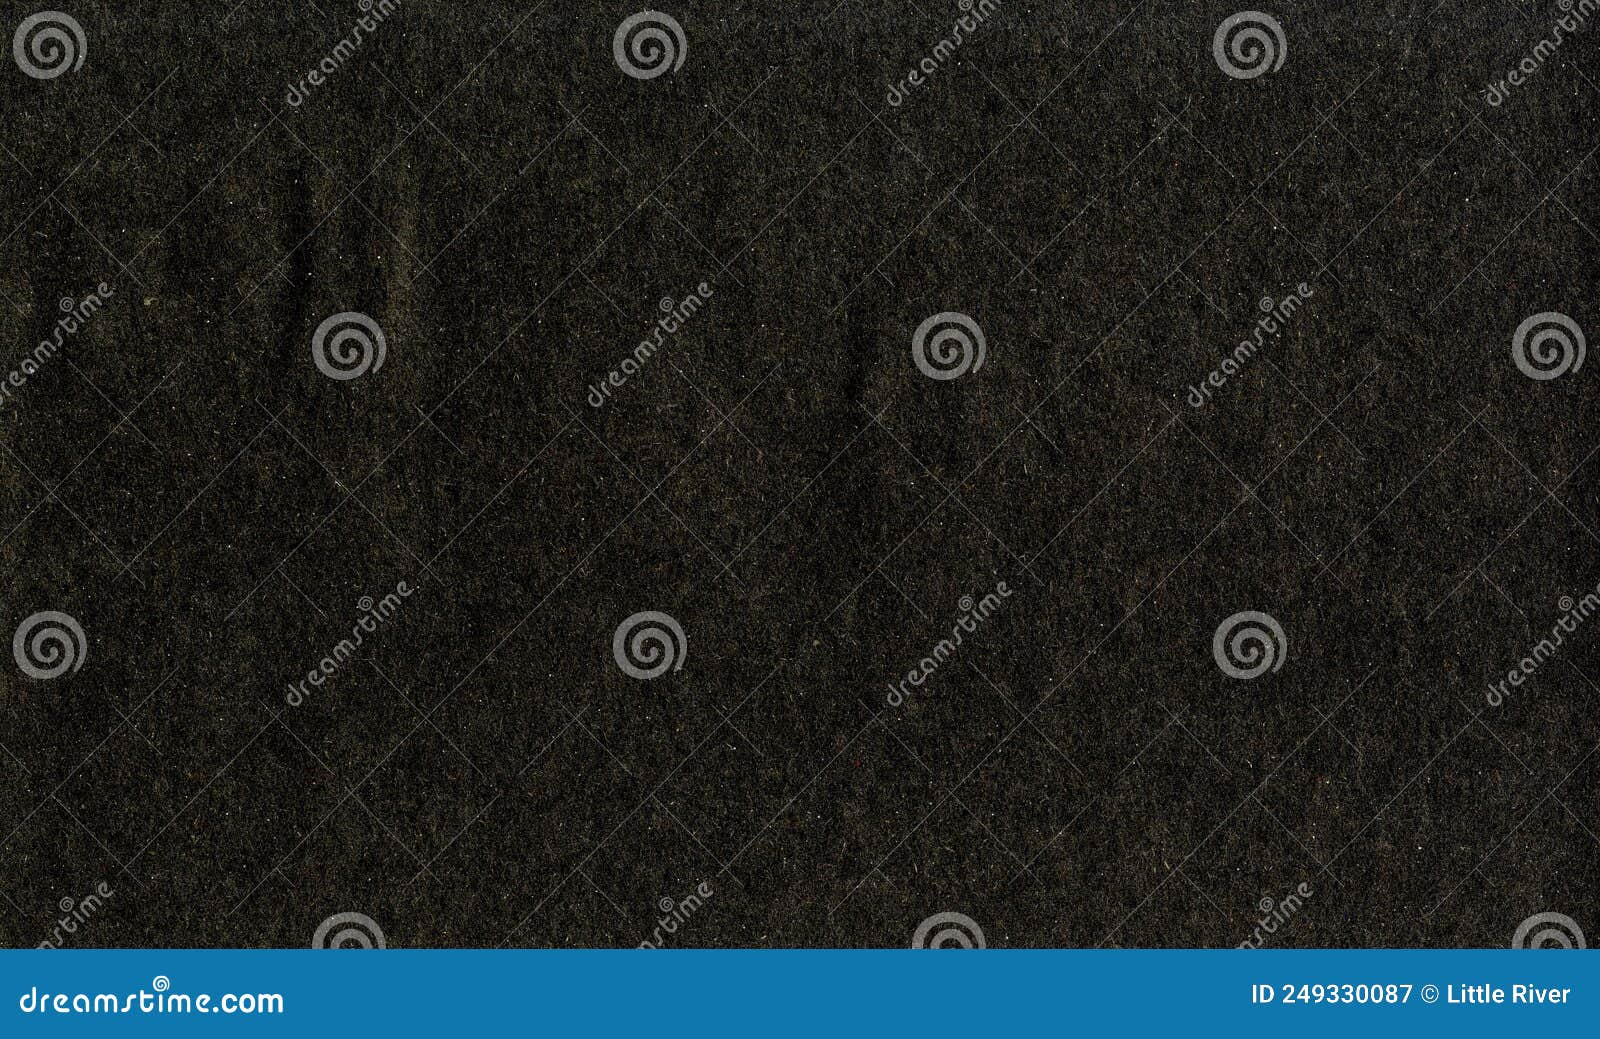 High Resolution Black, Elegant Uncoated Paper Texture Scan with Rough ...